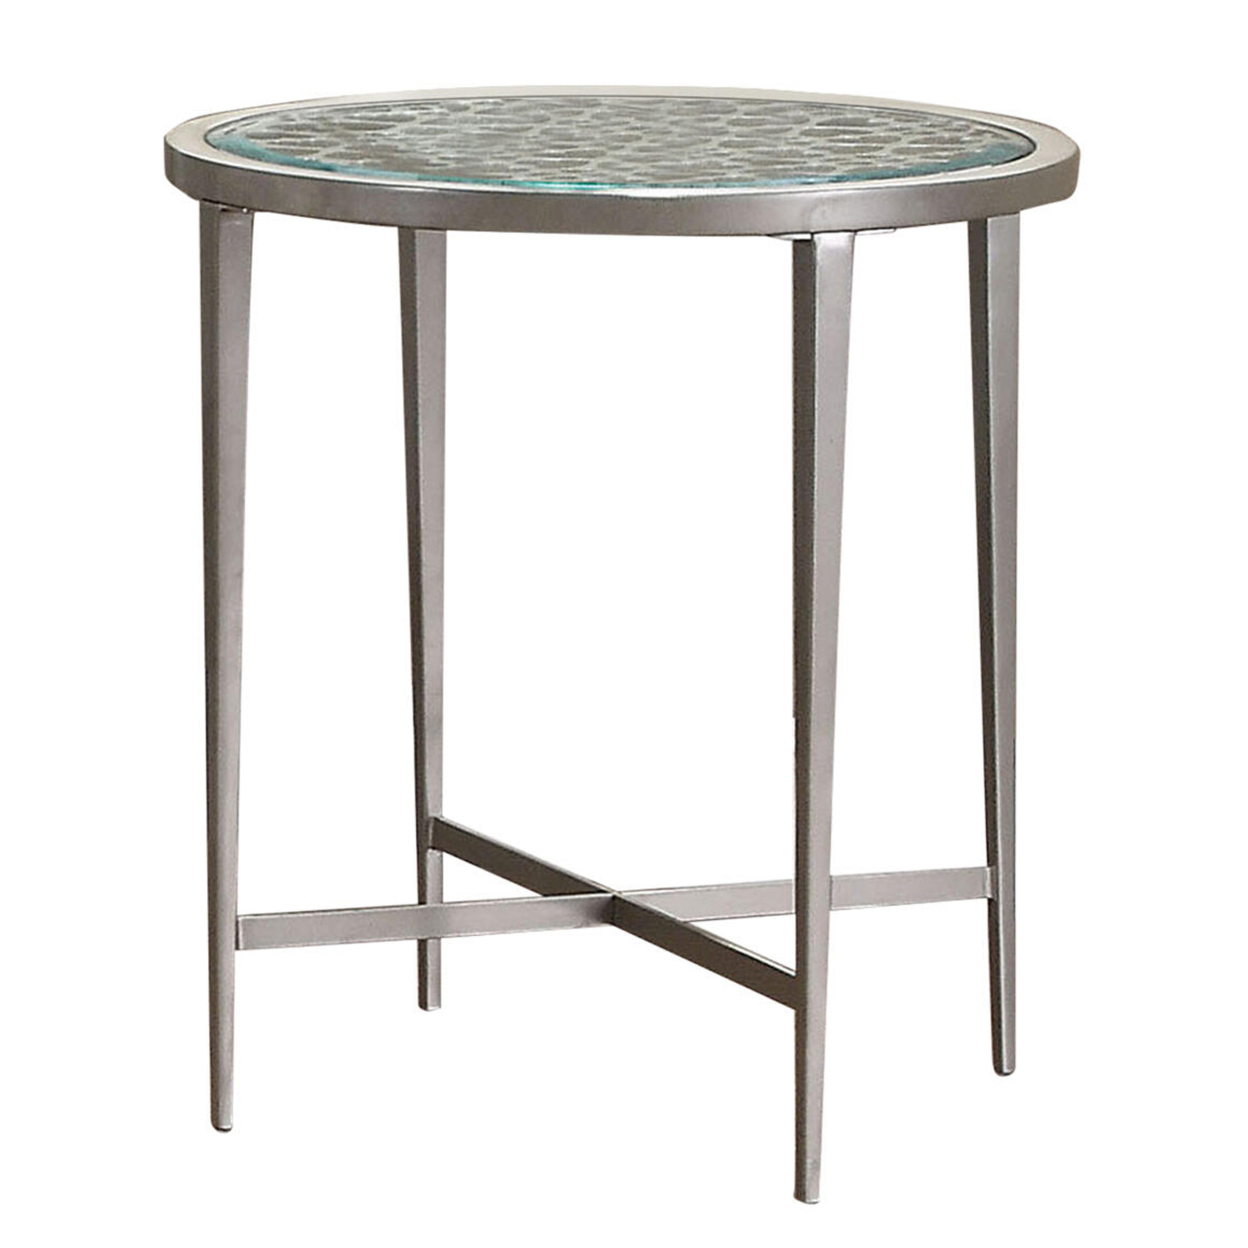 Round Glass Top Metal End Table With Sleek Tapered Legs, Silver- Saltoro Sherpi